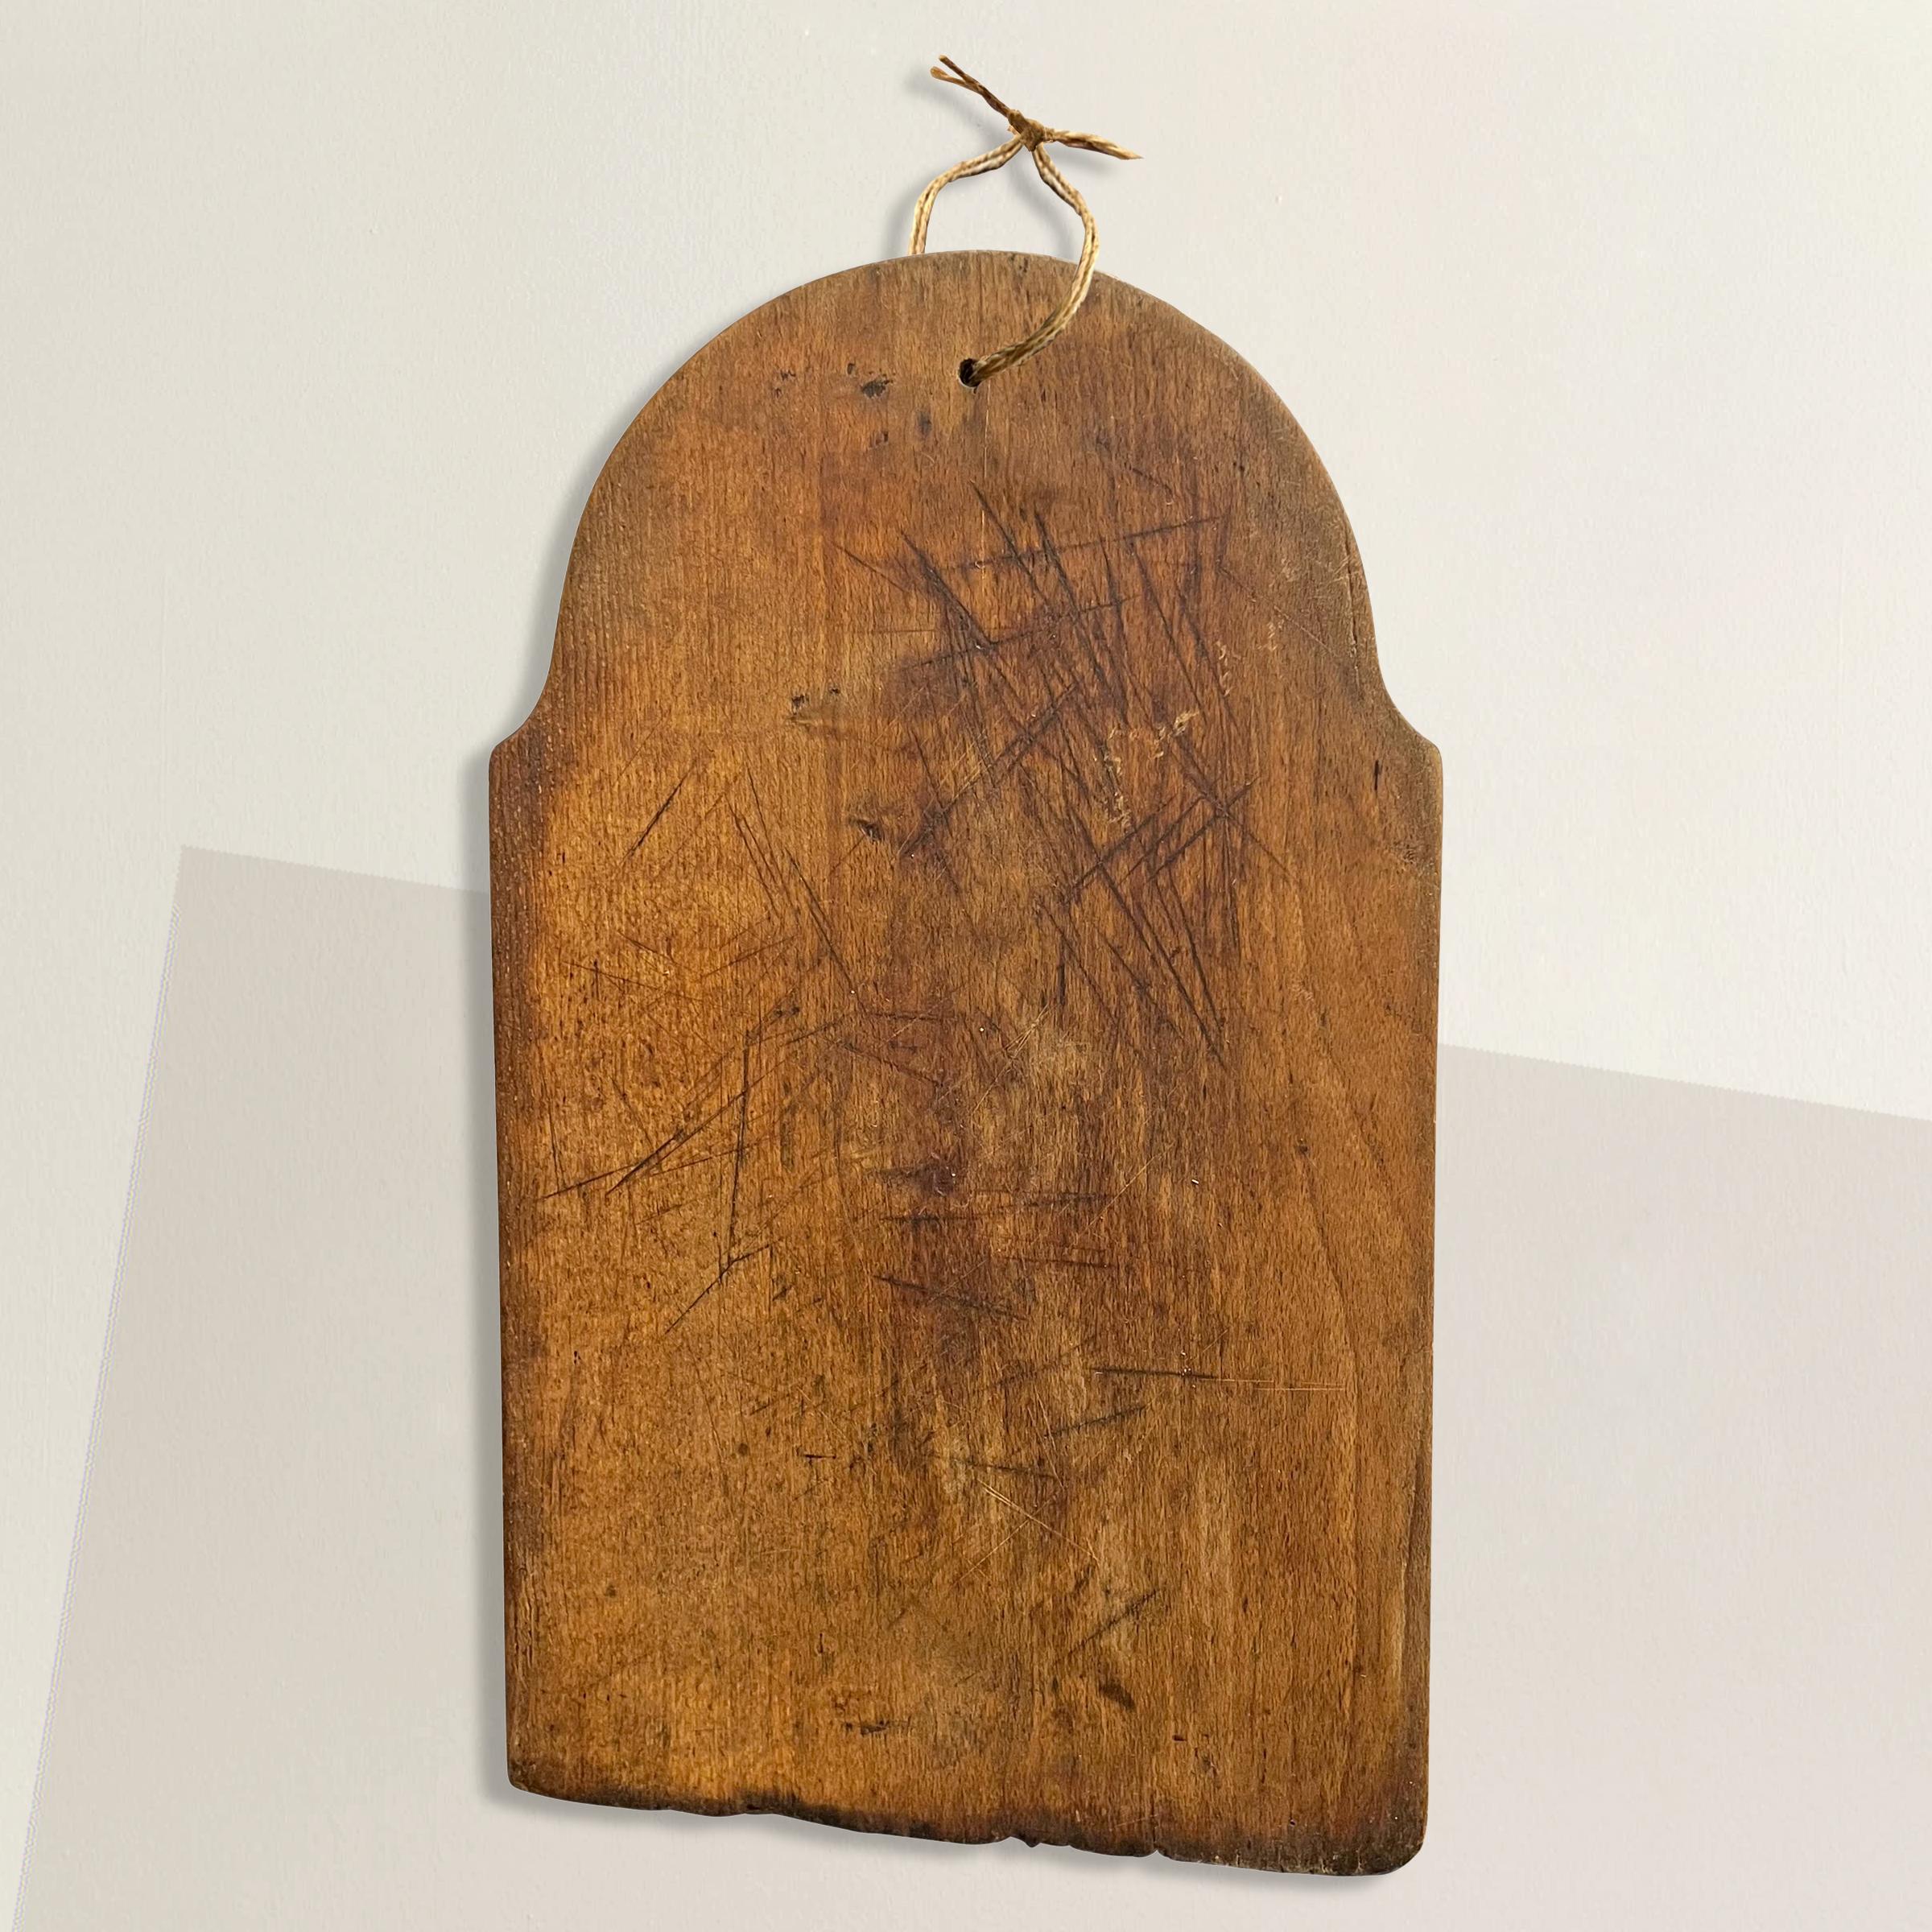 A wonderful early 20th century French cutting board with hundreds of knife marks, a jute string for hanging, and a patina that only time can bestow. Perfect for chopping vegetables and bread, or serving cheese and charcuterie at your next fête.